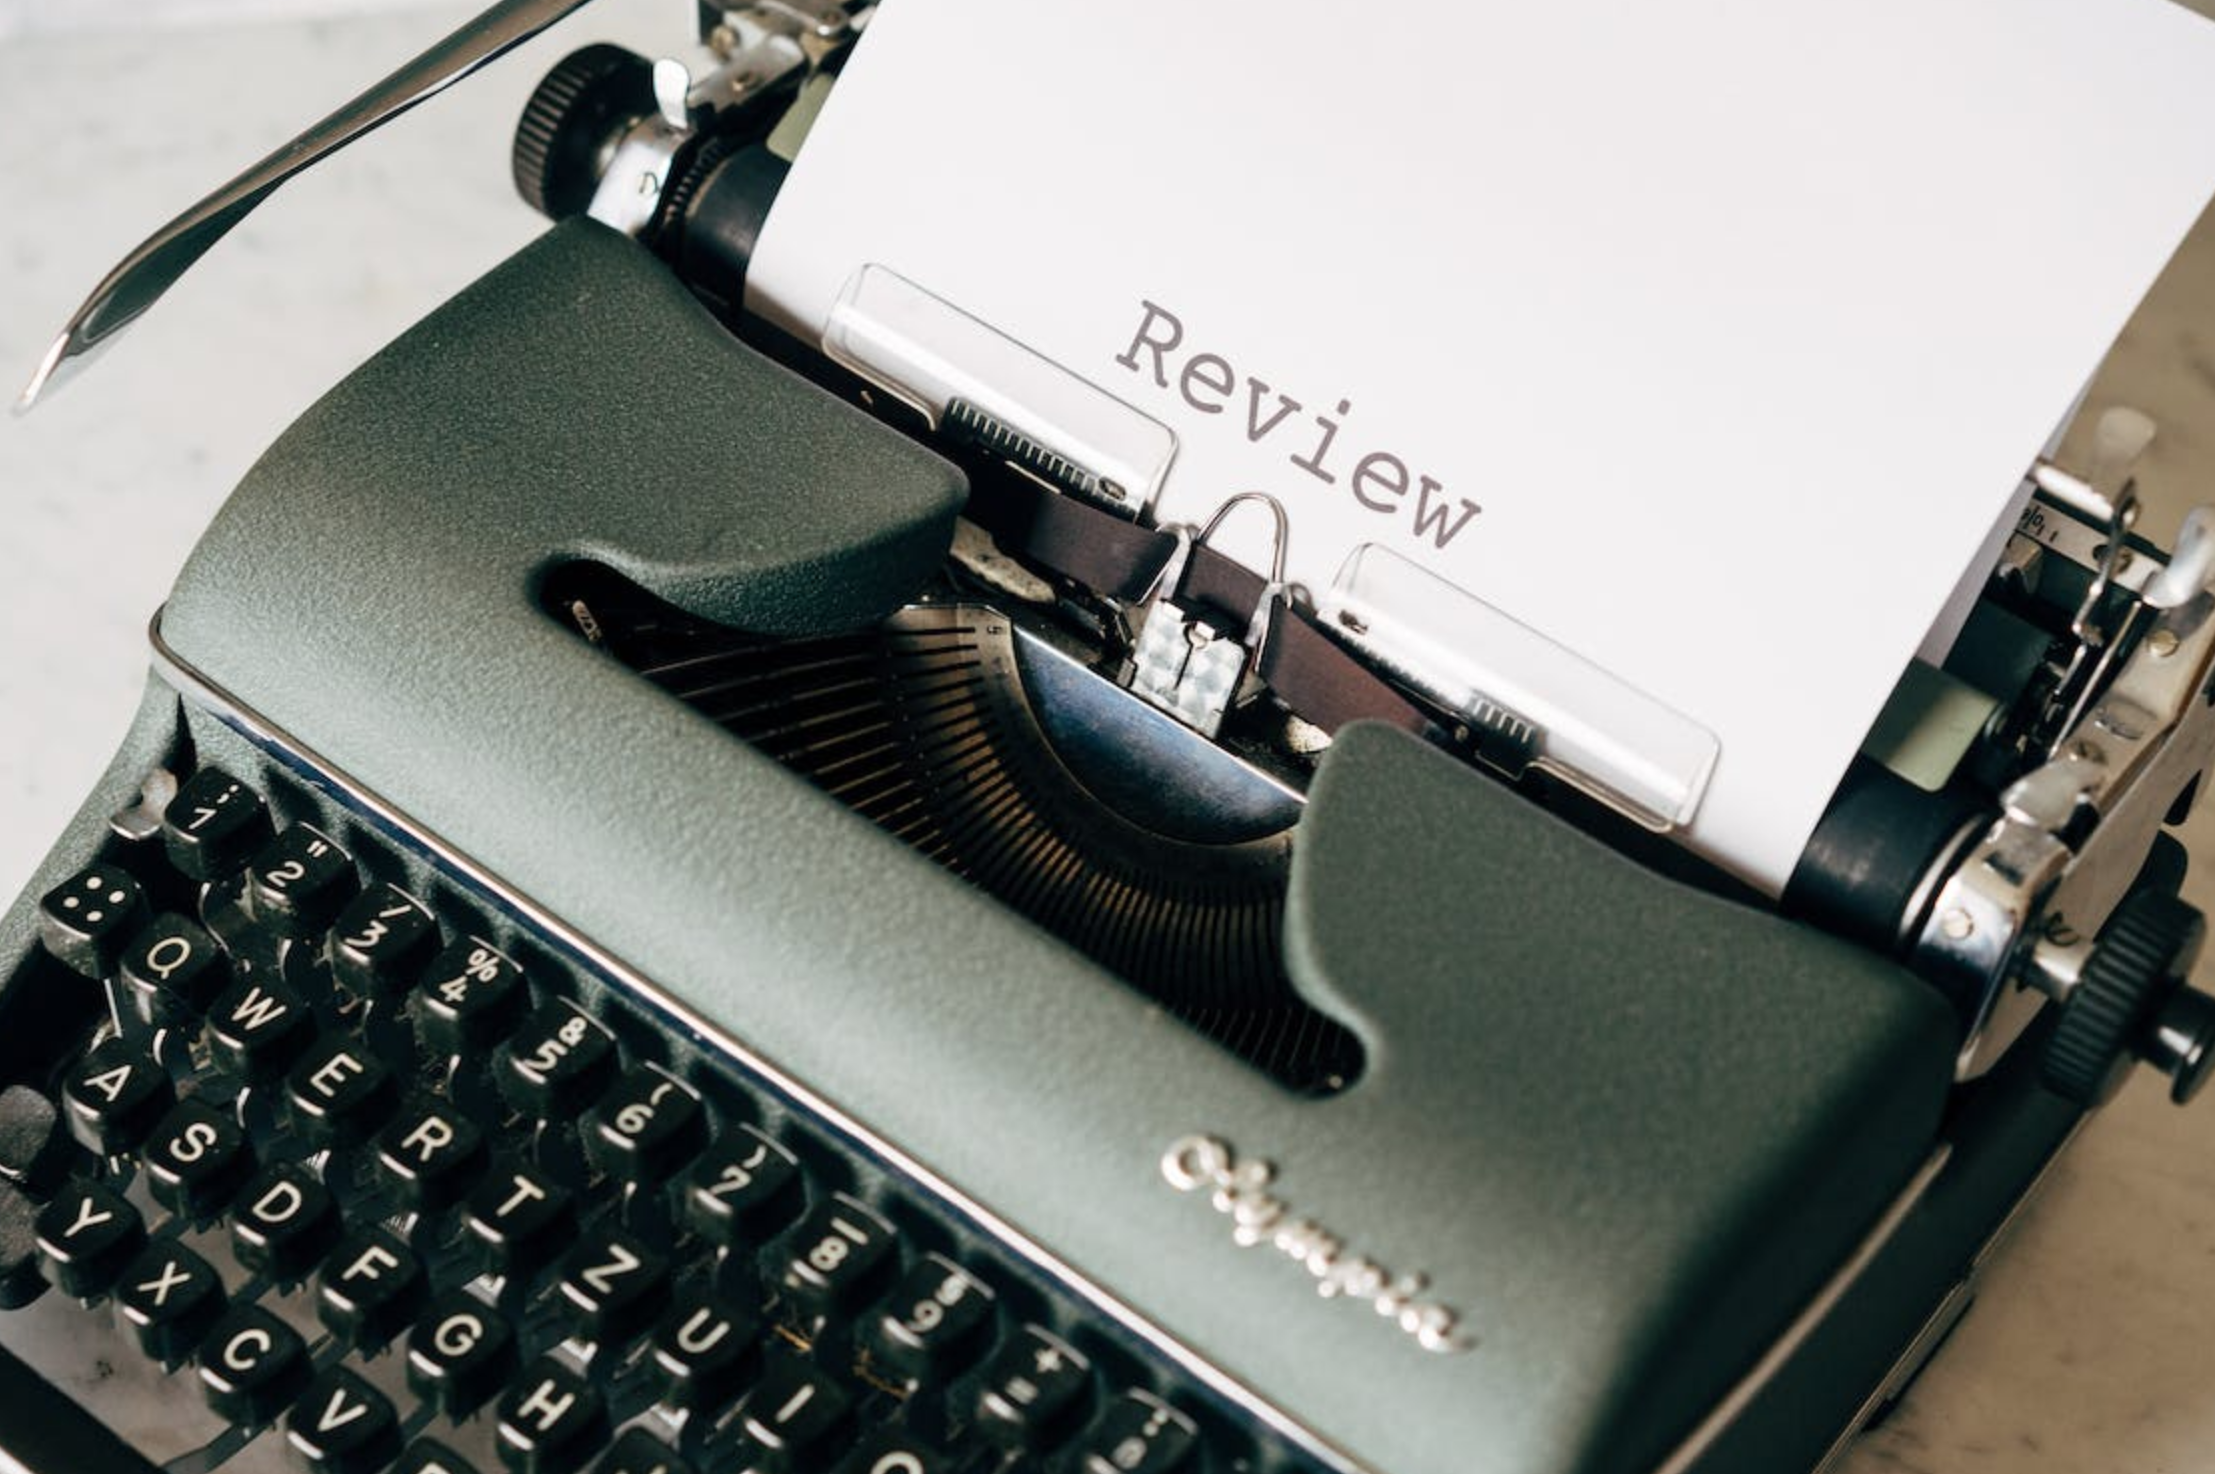 A paper with the word “Review” written on it on a typewriter.